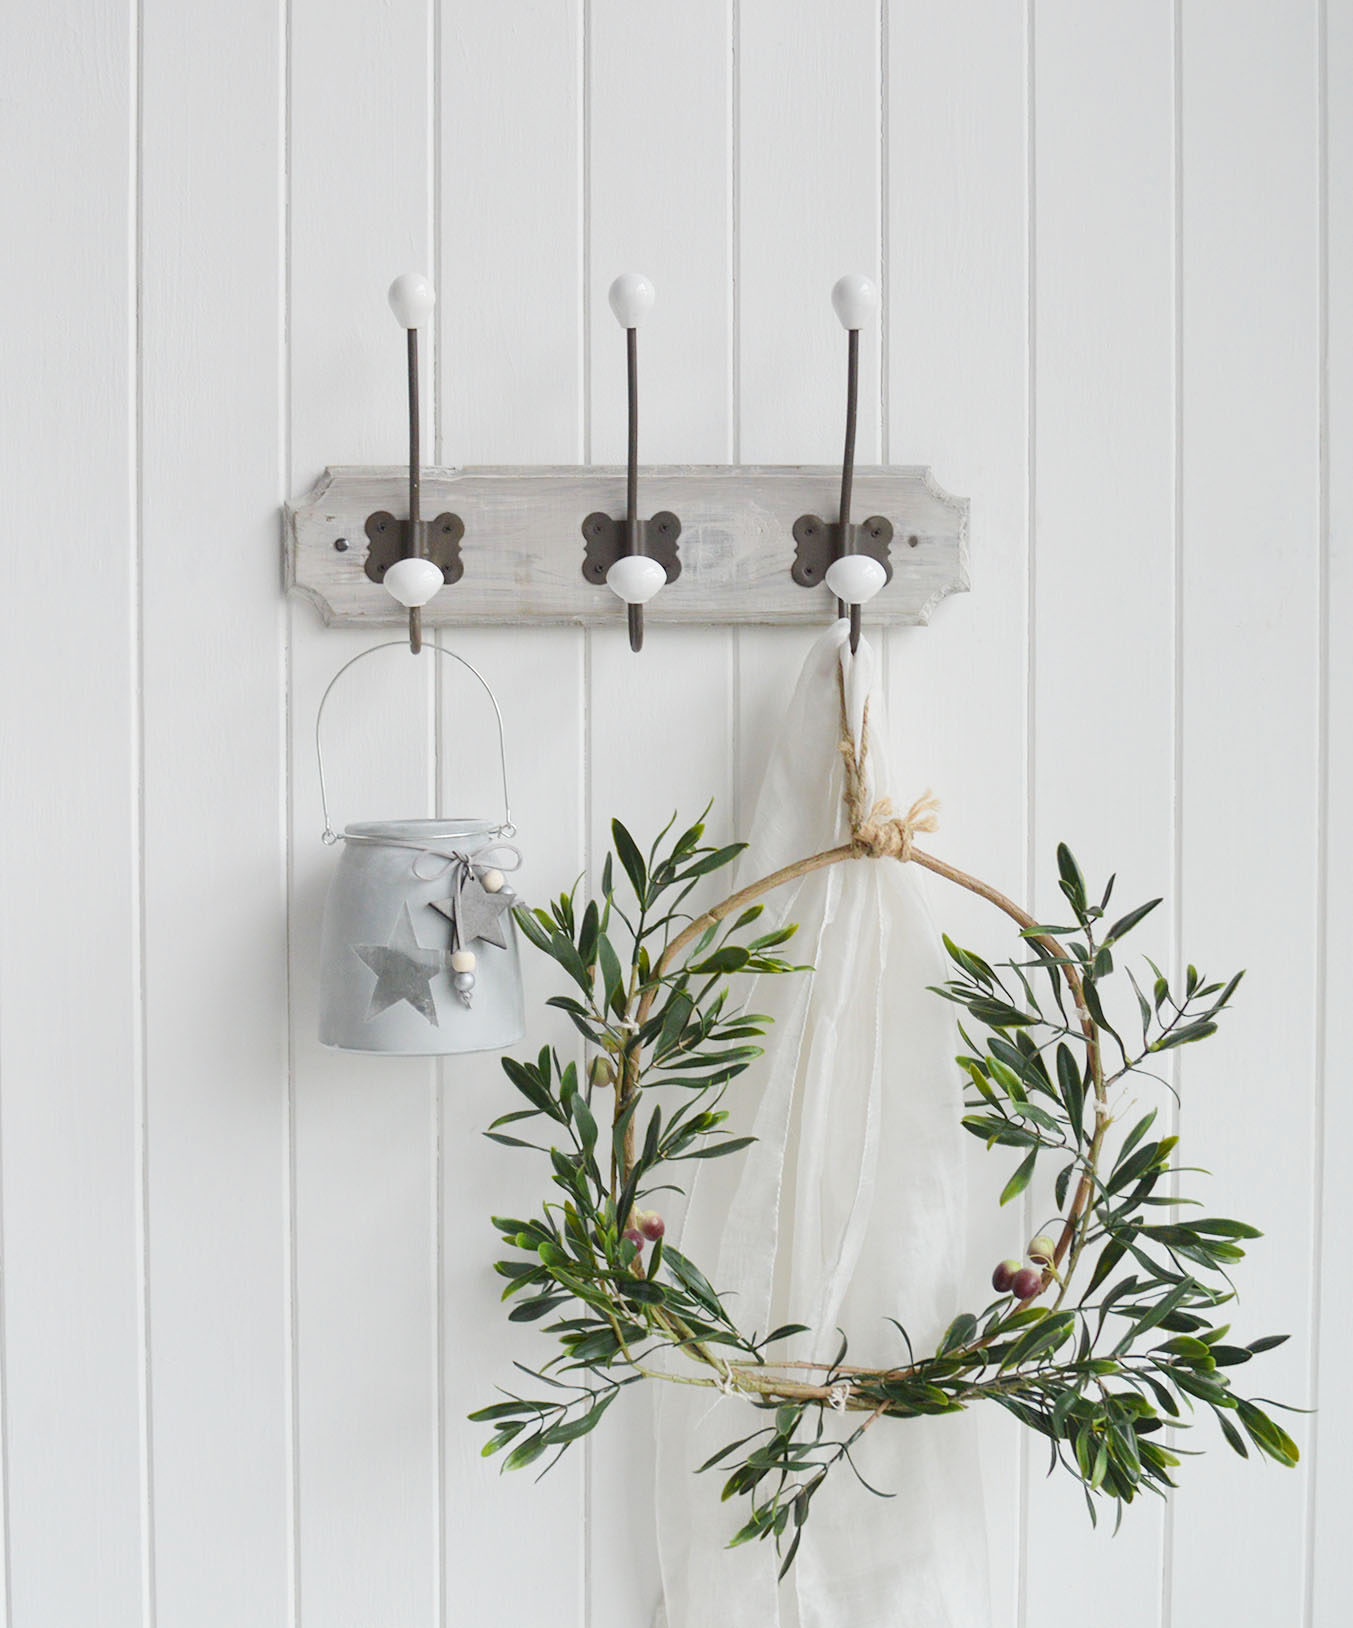 A wall mounted coat rack with three aged metal double hooks with porcelain ends on a rustic grey washed wooden backing.

The Pawtucket Range is a range of furniture and home decor made from grey wash reclaimed wood for an authentic distressed rustic look .